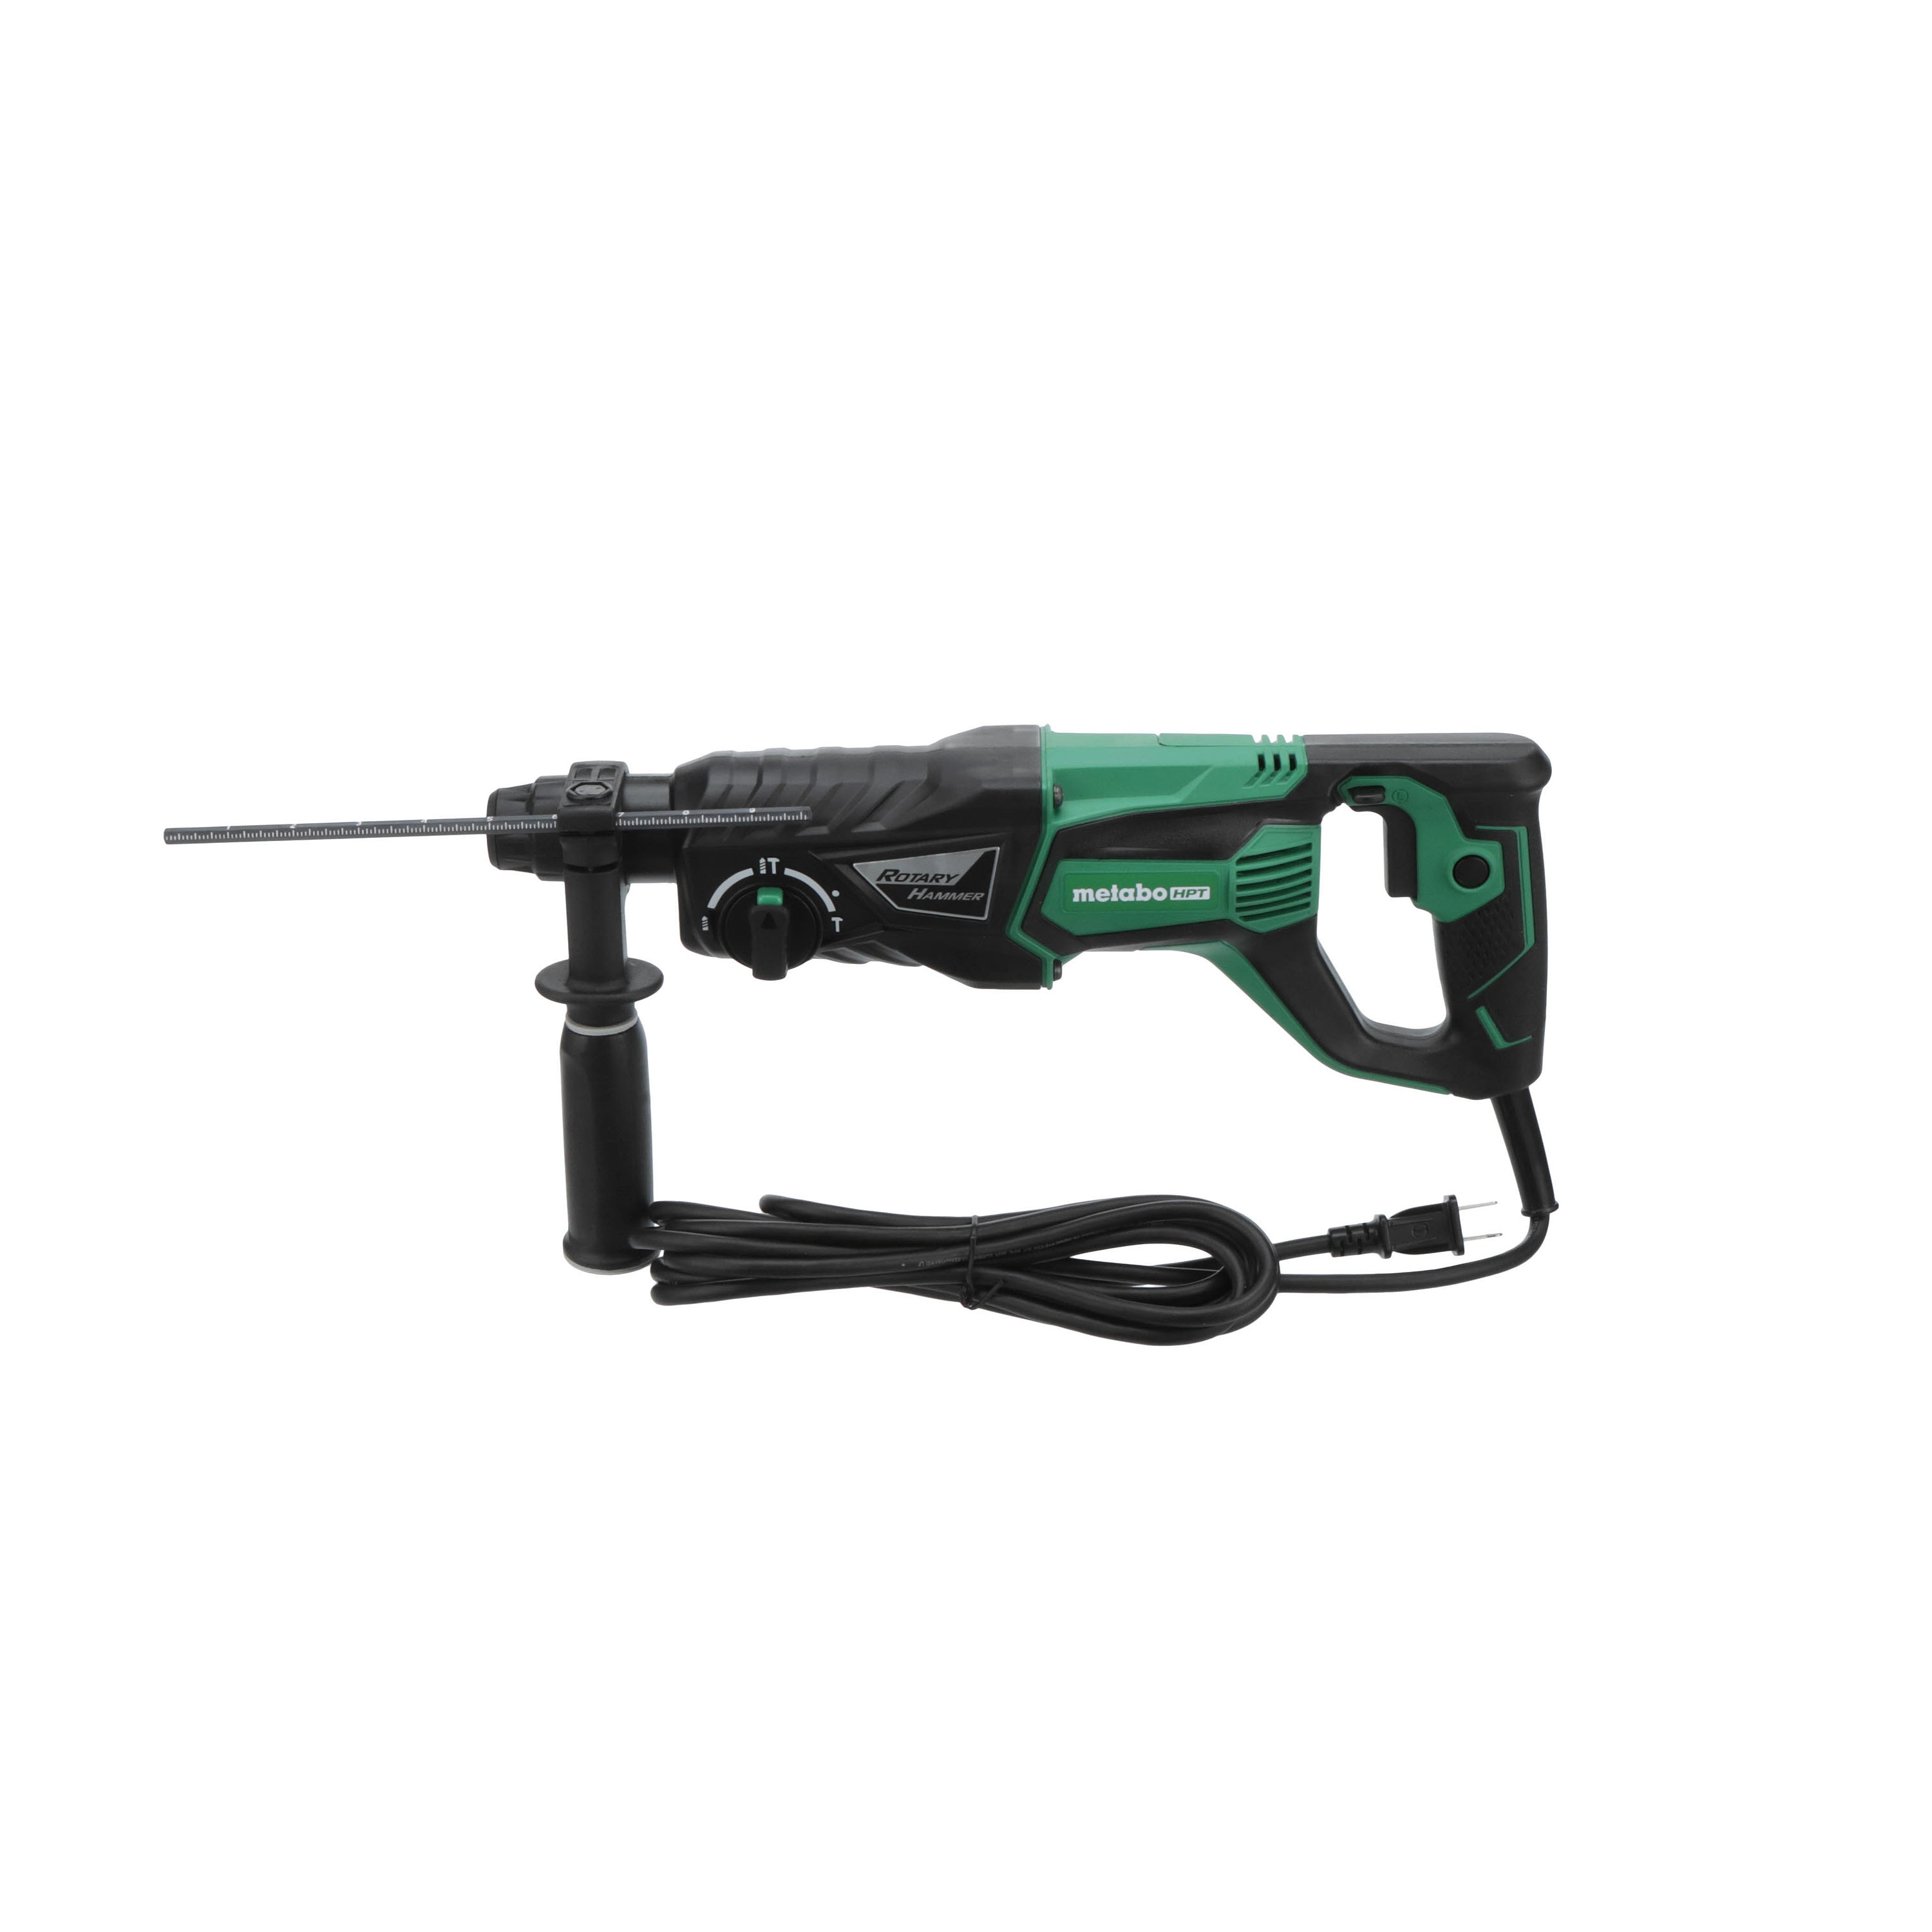 Metabo HPT DH26PFM 7.5 Amp 1" 3-Mode SDS Plus Rotary Hammer with Case for sale online 